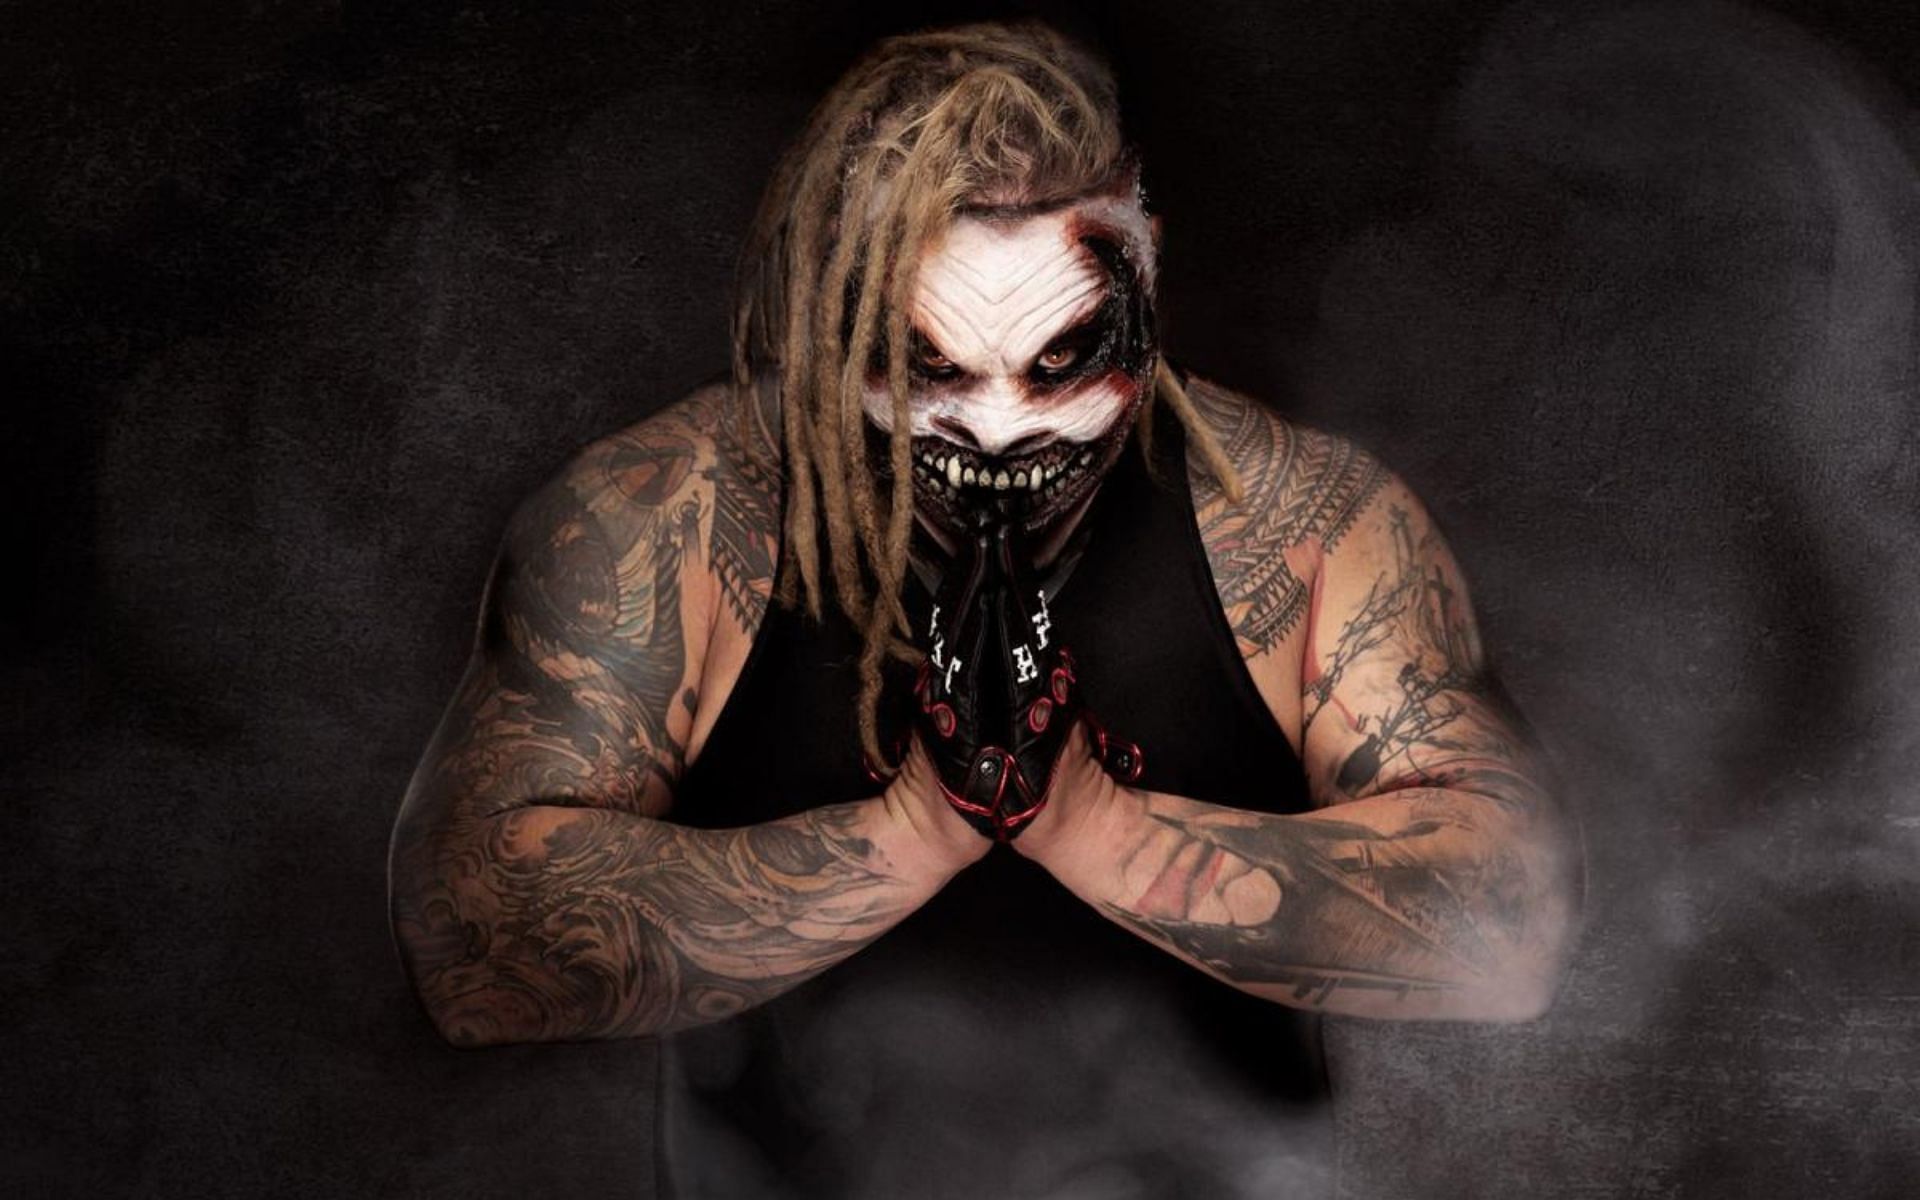 The Fiend had an impressive run in this dark and mysterious gimmick